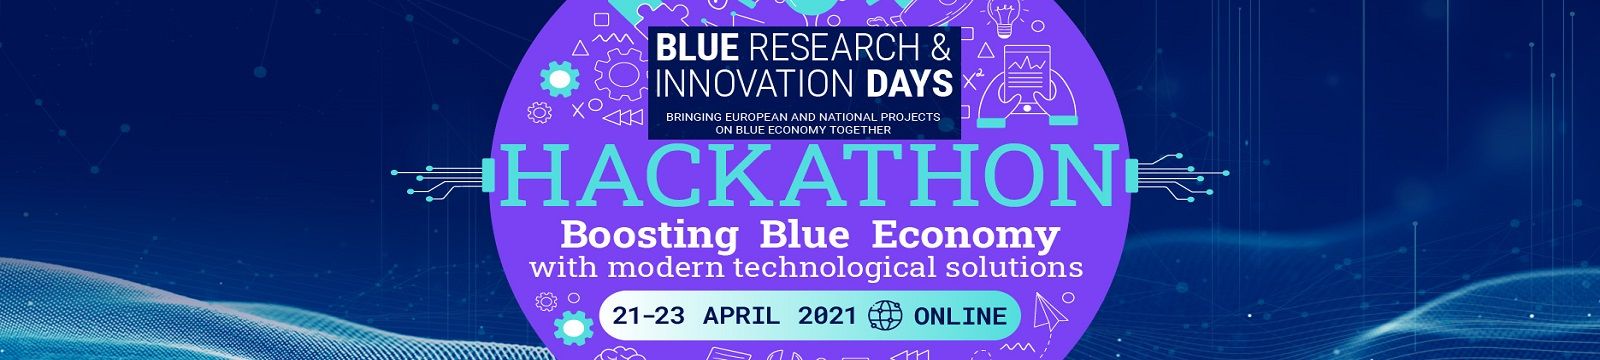 Blue Research and Innovation Days, online event, 19-23 April 2021